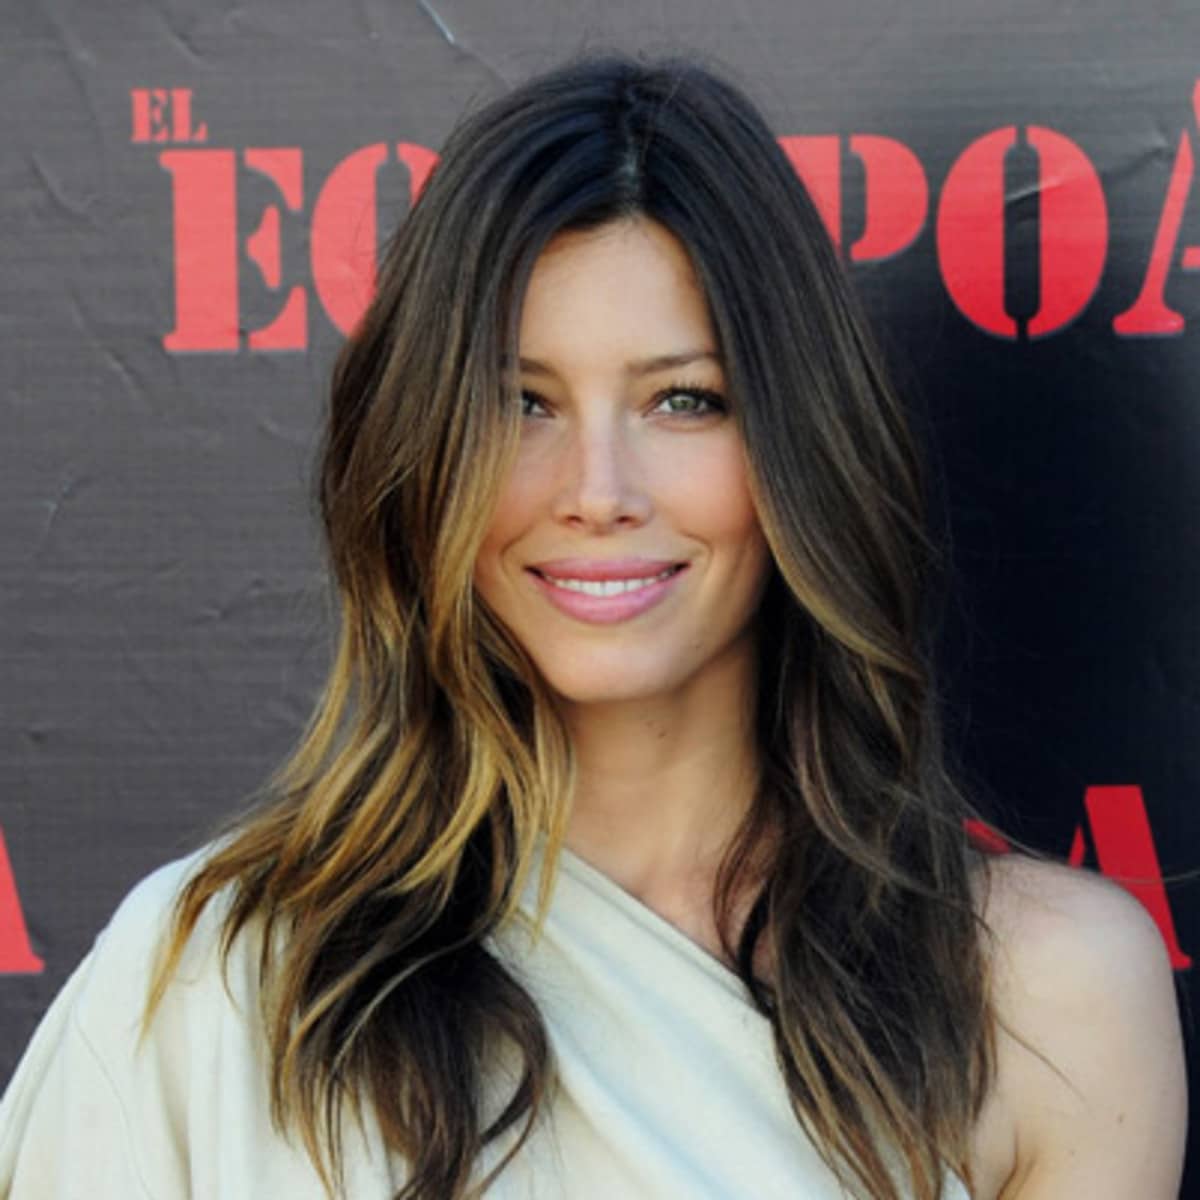 8 Things You Didn't Know About Jessica Biel